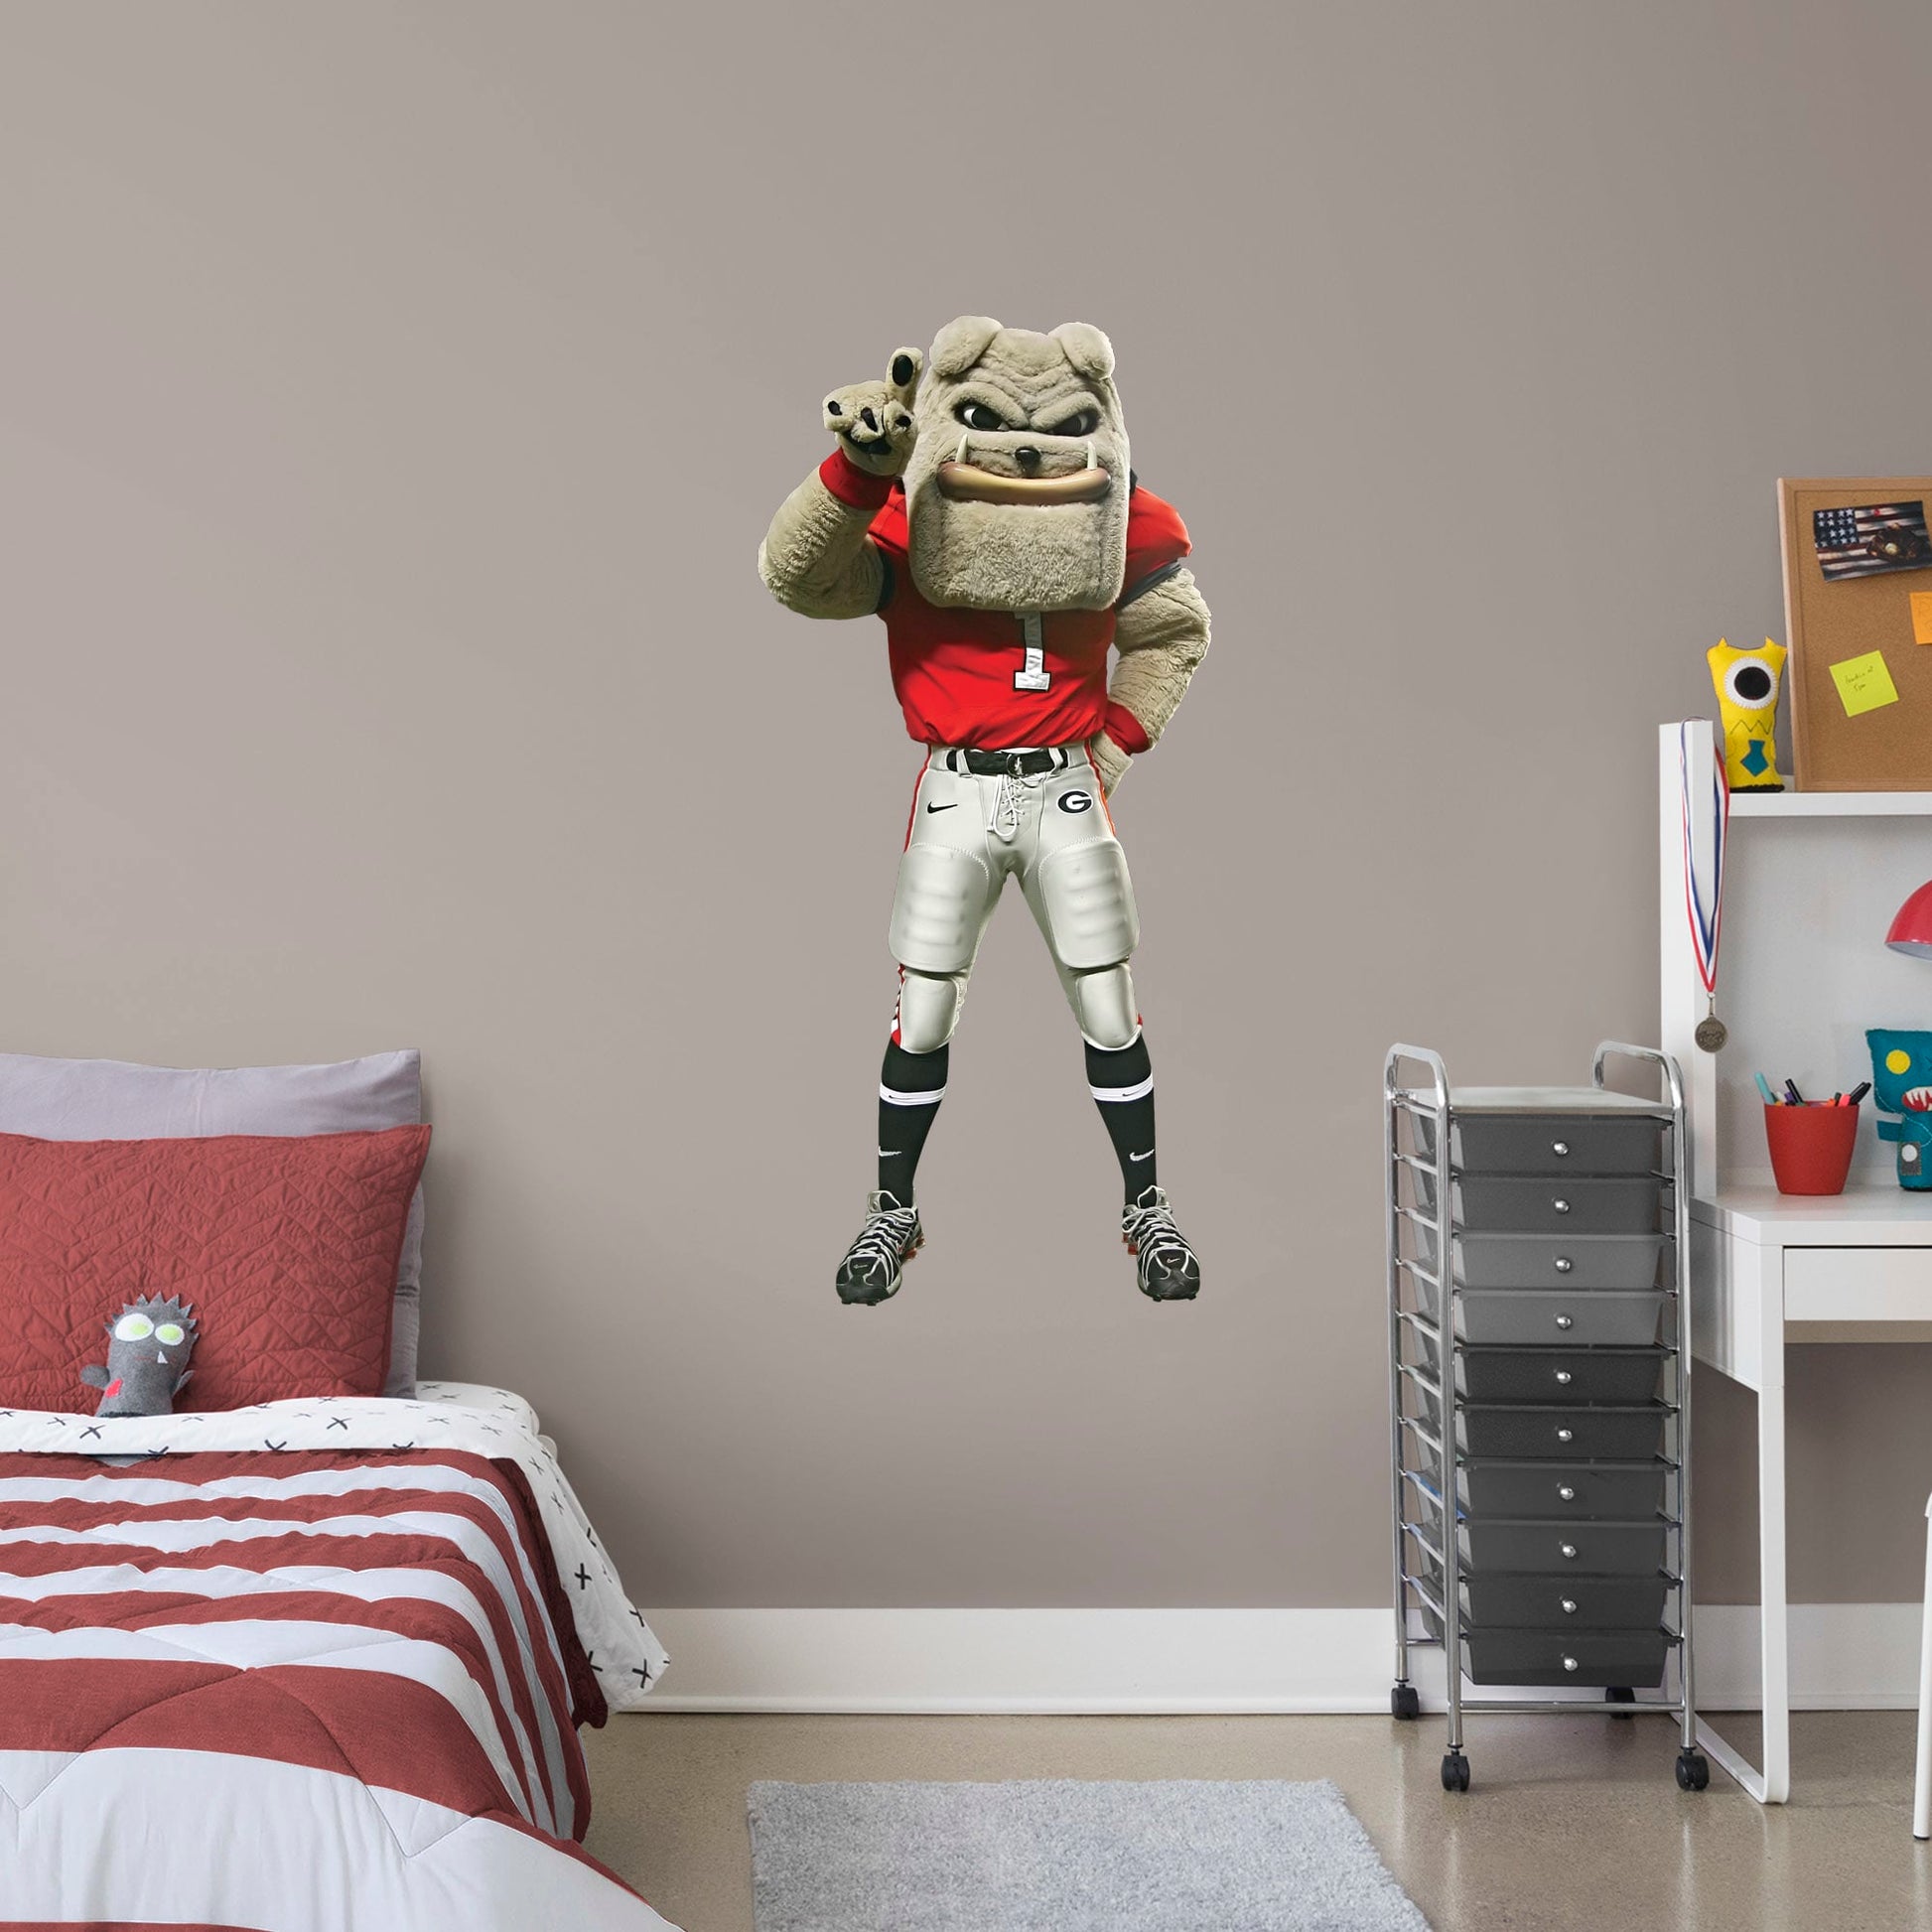 Life-Size Mascot + 2 Decals (36"W x 78"H)